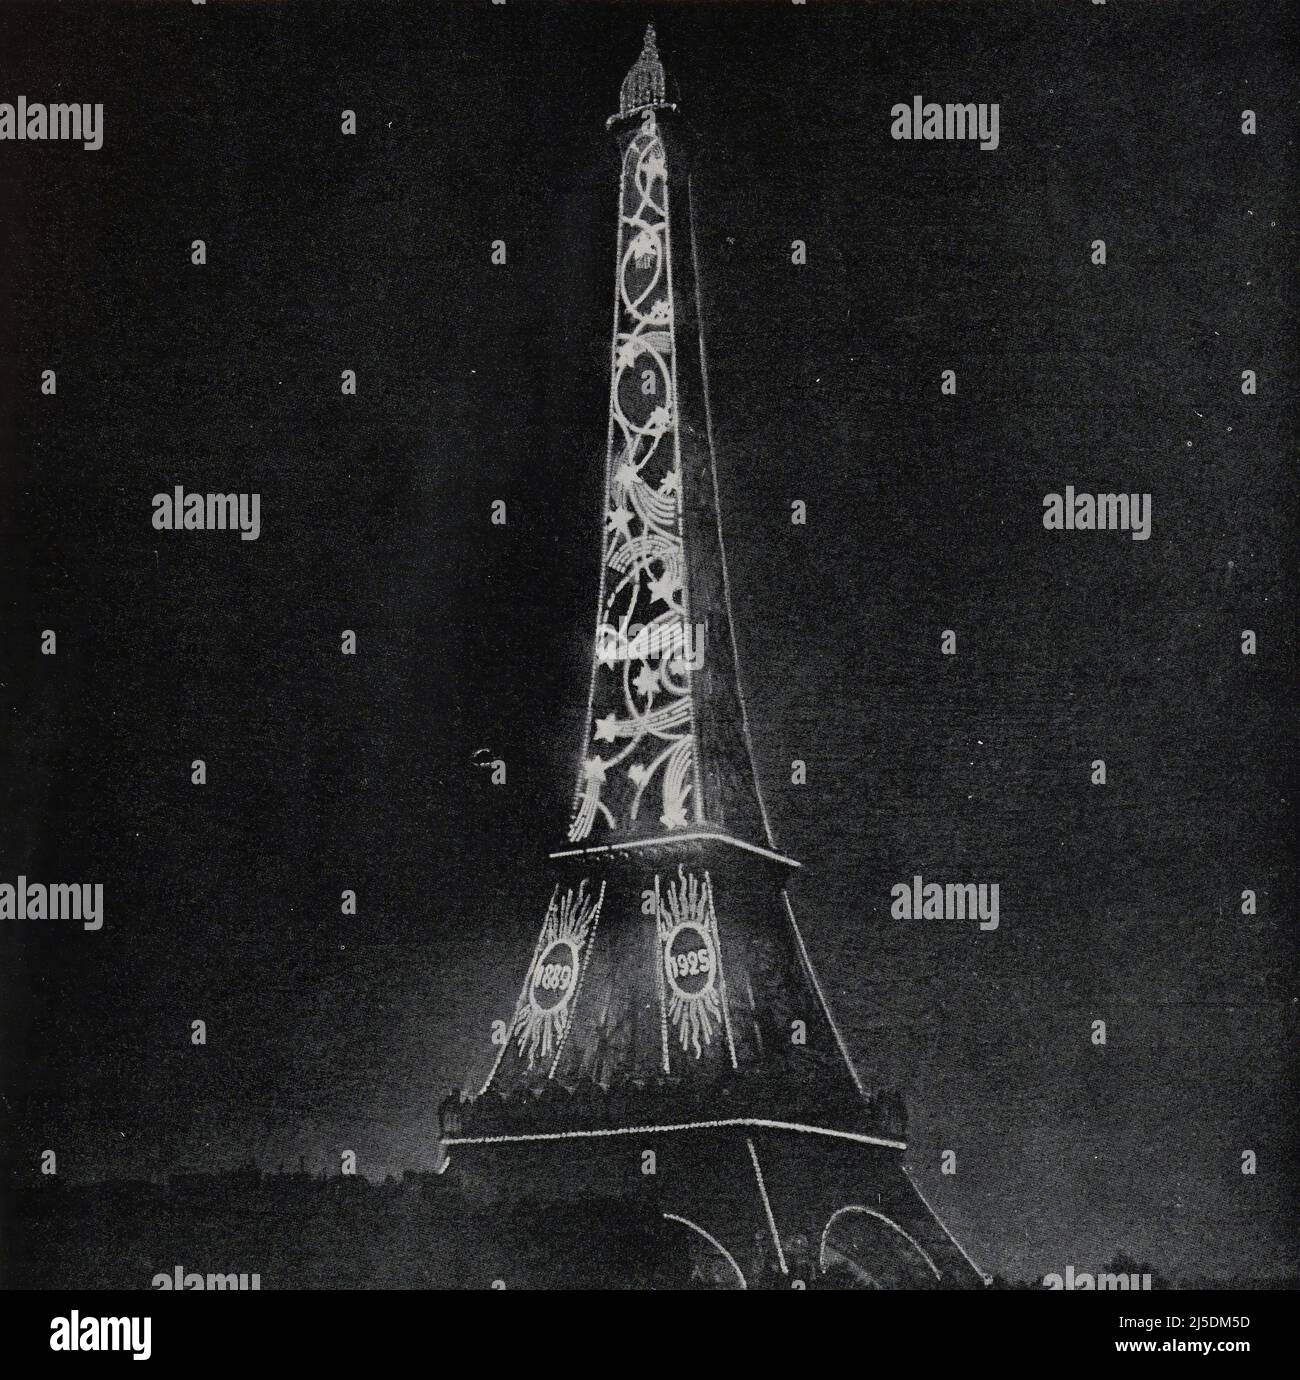 Eng translation : " NIGHT VISION IN THE SKY OF PARIS: THE LIGHTED DECORATION  OF THE EIFFEL TOWER Photograph taken from the footbridge that connects the  Quai d'Orsay to the Avenue de